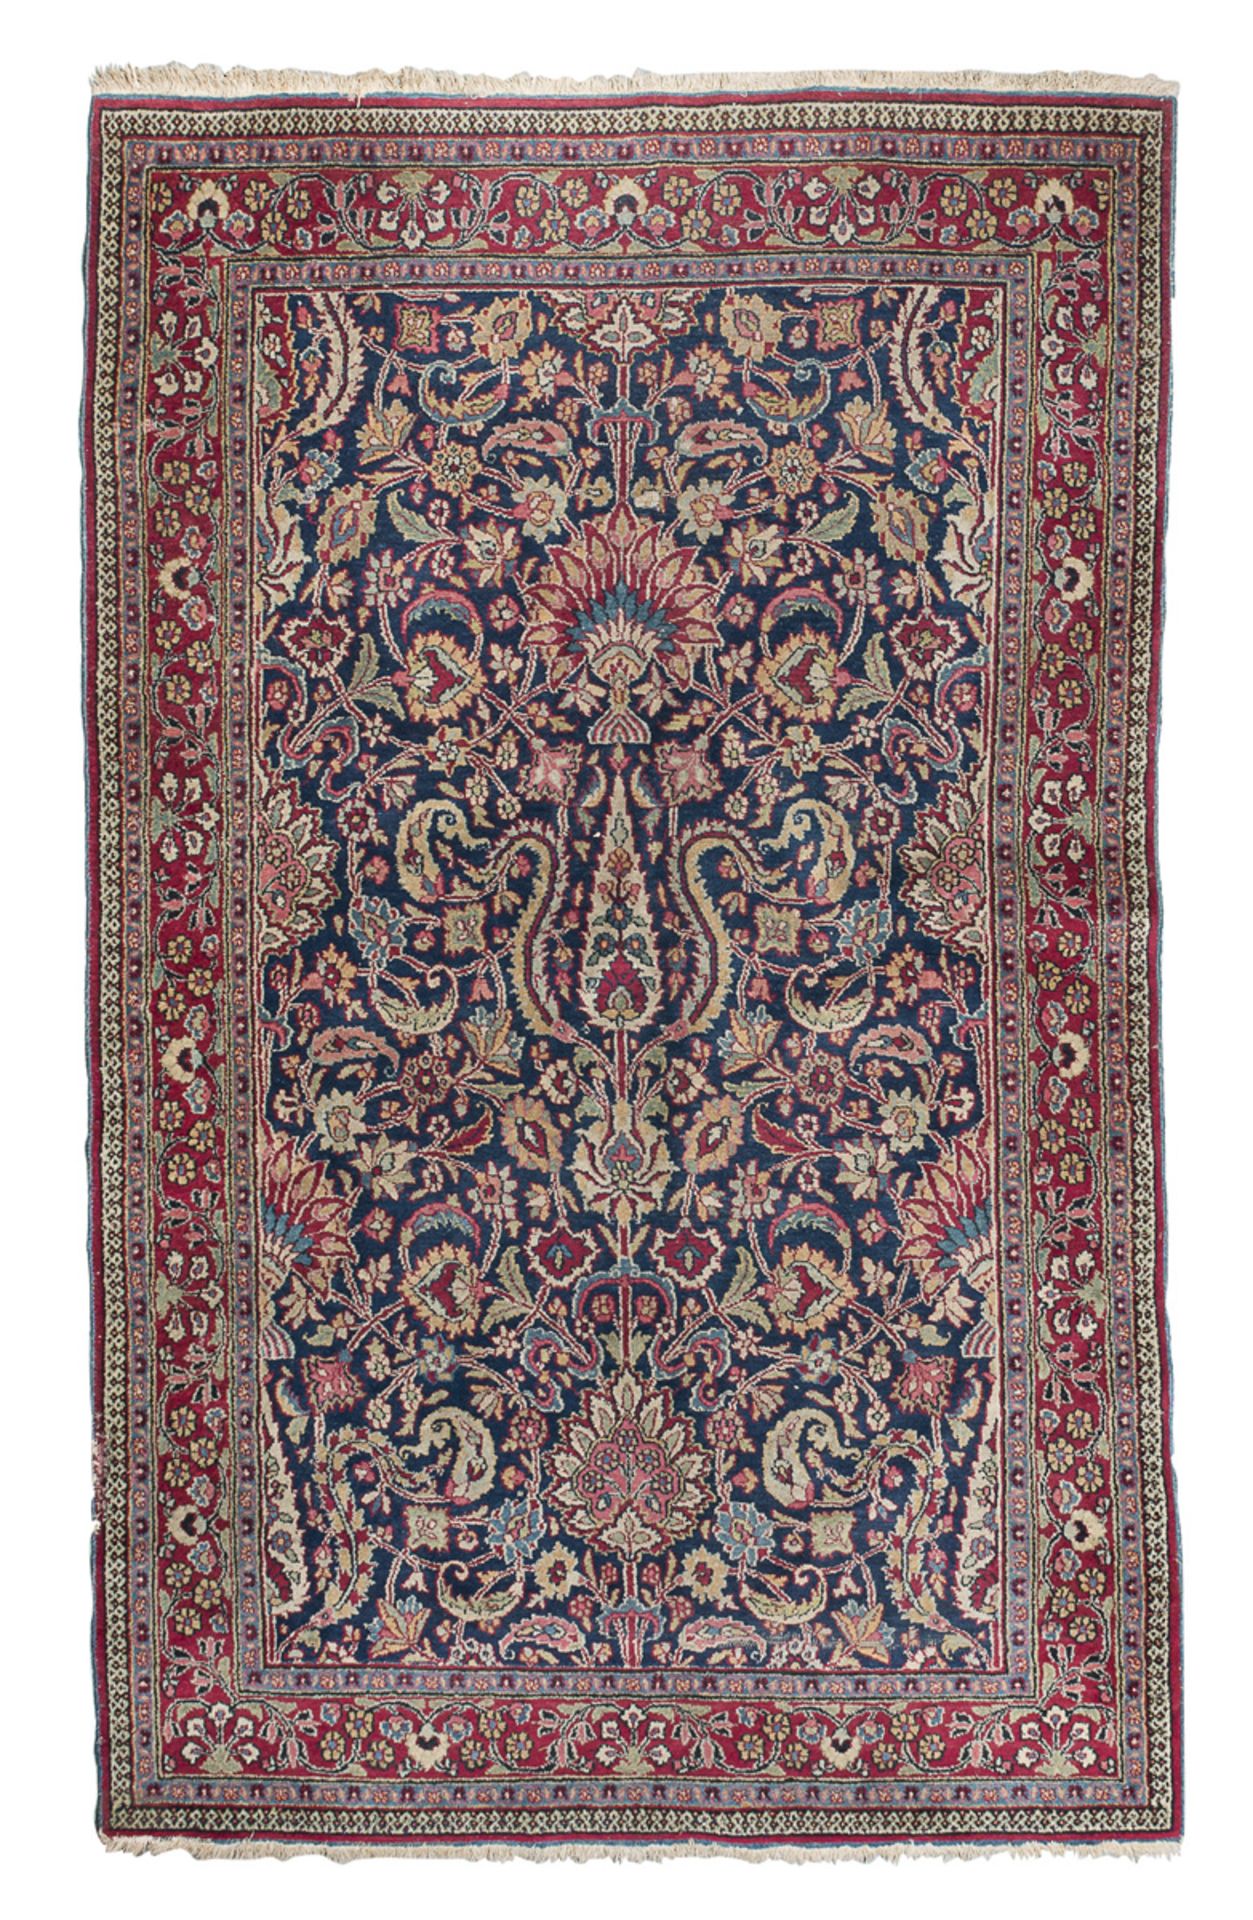 MALAYER CARPET FIRST HALF OF THE 20TH CENTURY